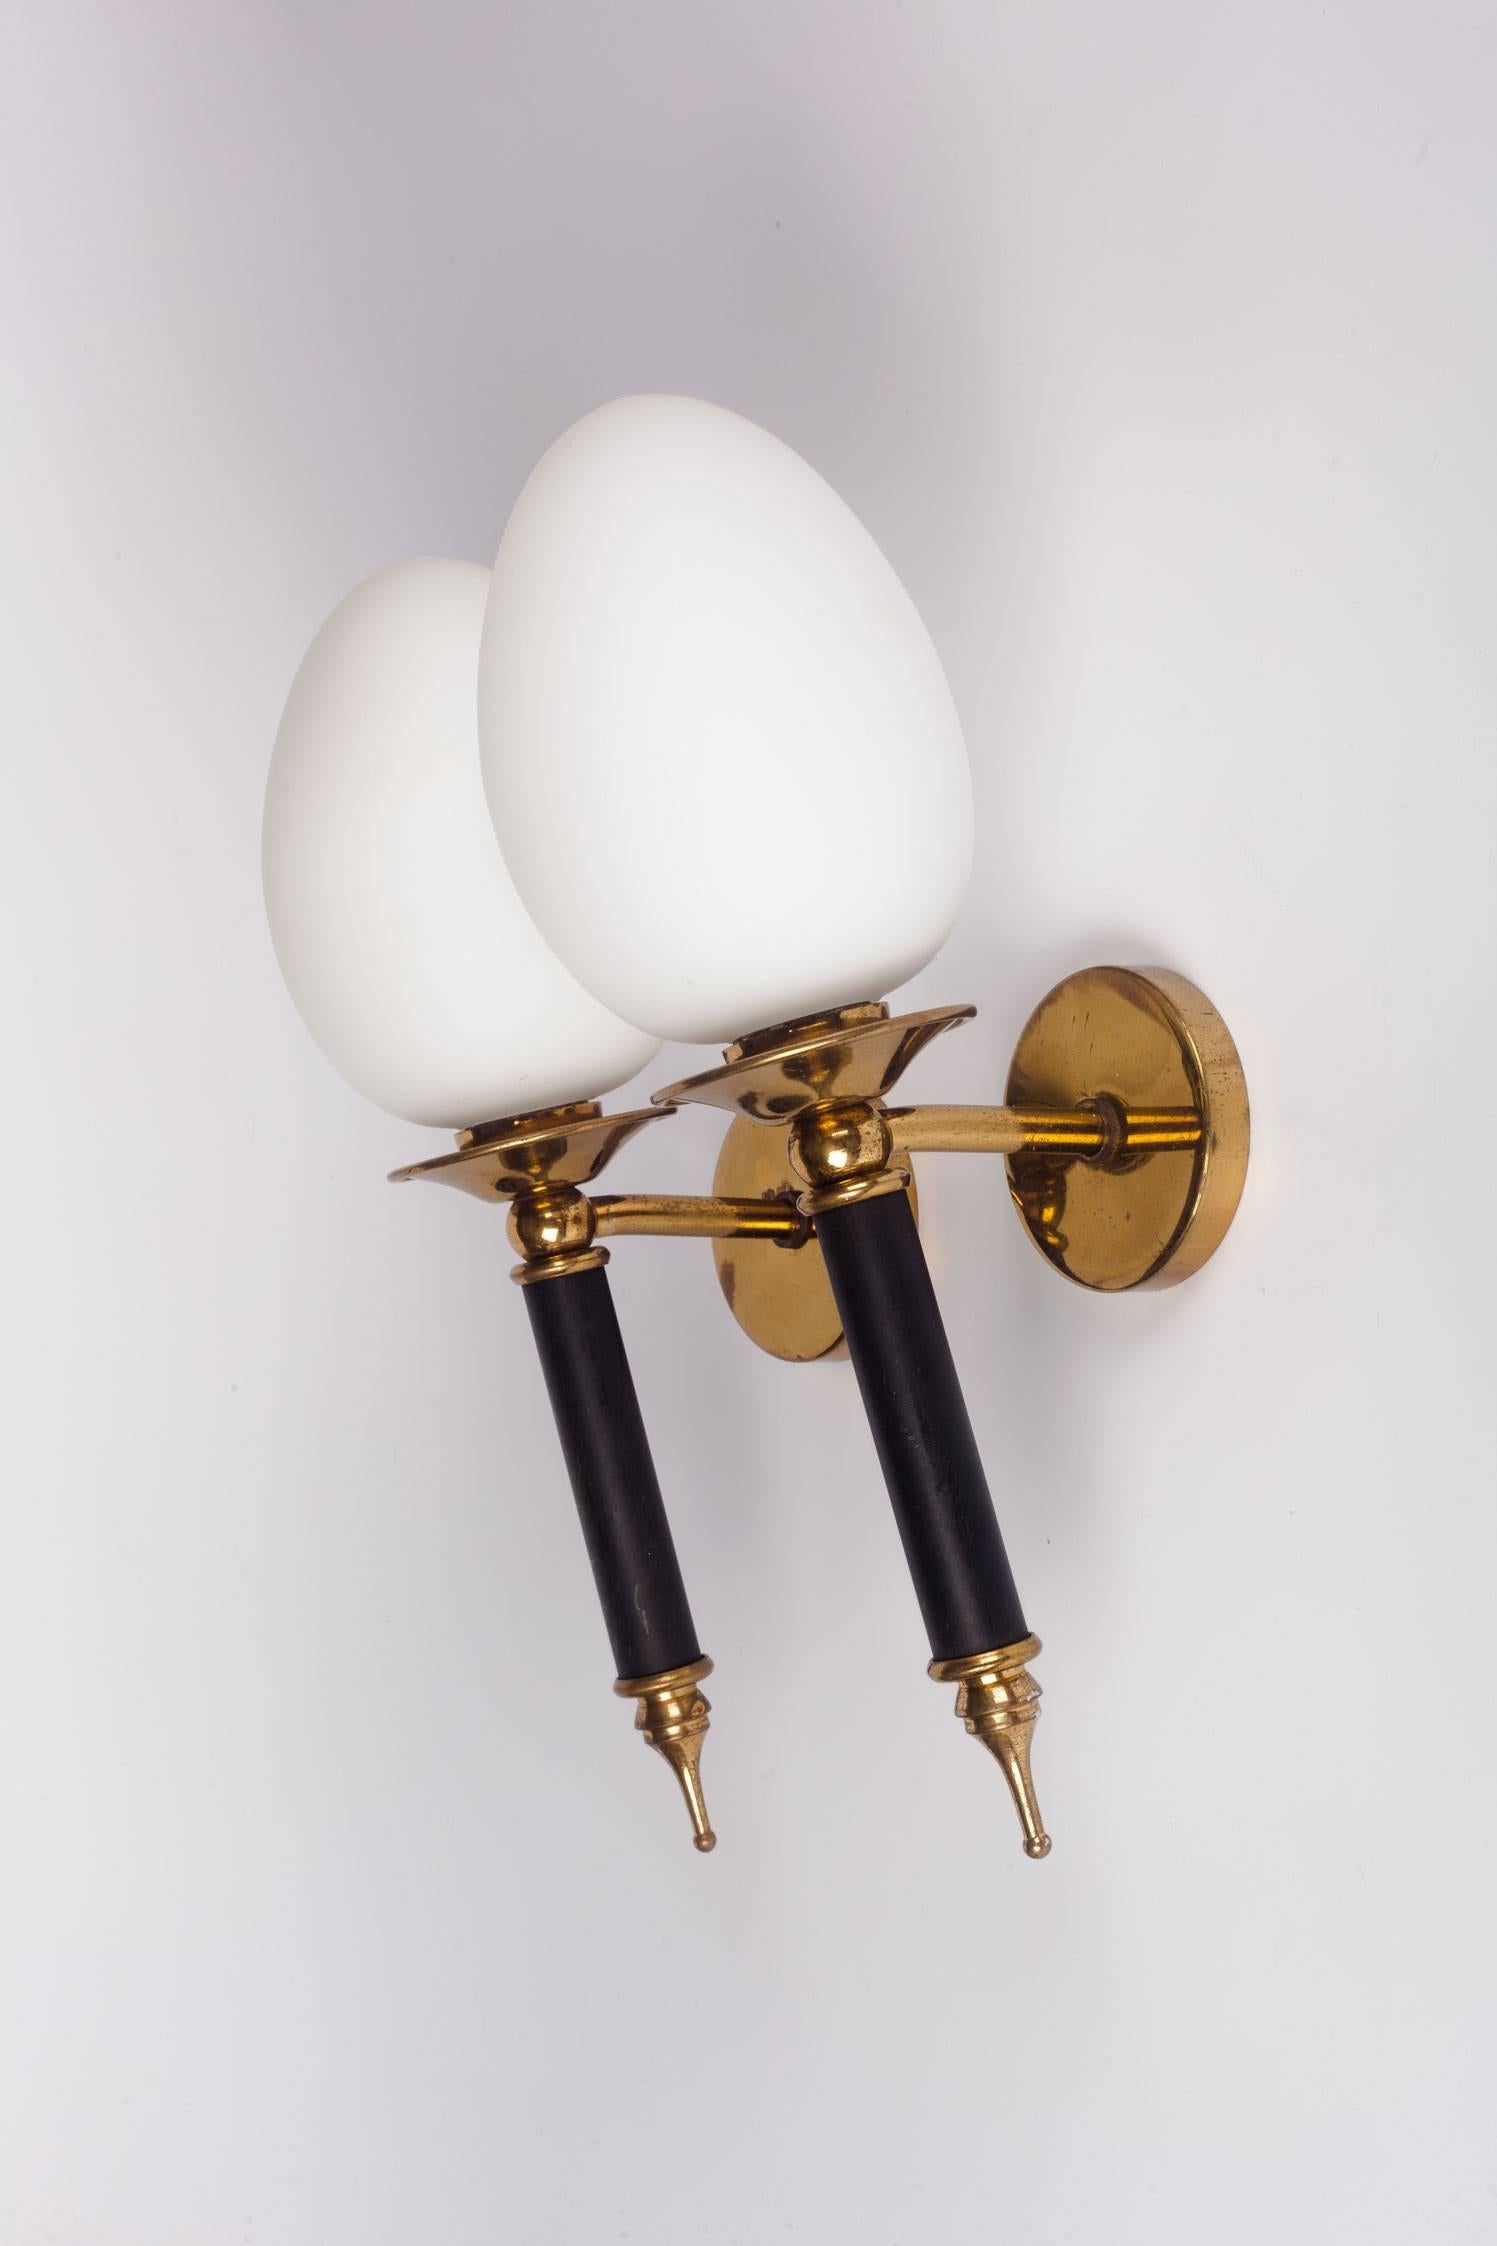 Pair of French sconces in glass, brass and painted metal. Egg-shaped milk glass diffusers give a soft textured look. Painted black metal stems with brass details. Made by Arlus in France, 1950s.